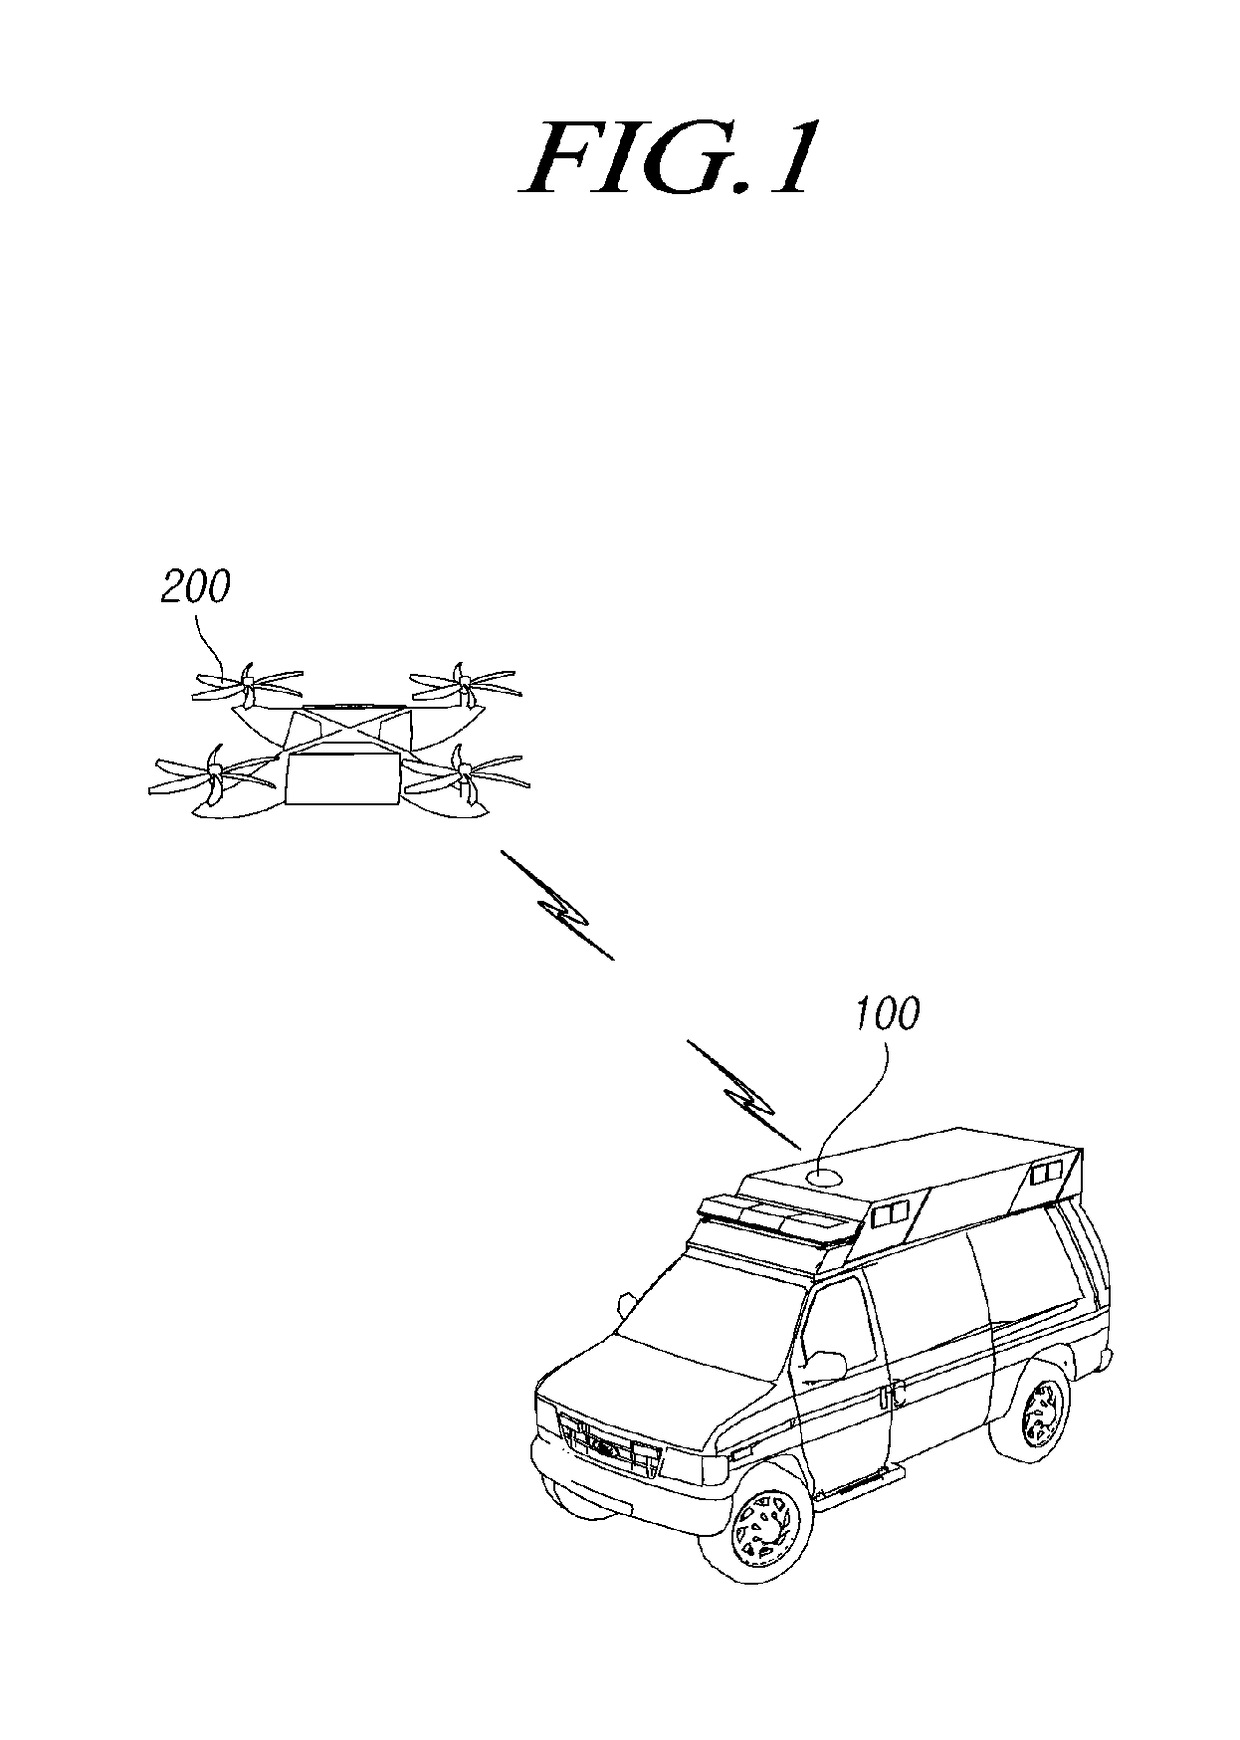 System for supporting emergency vehicle using drone